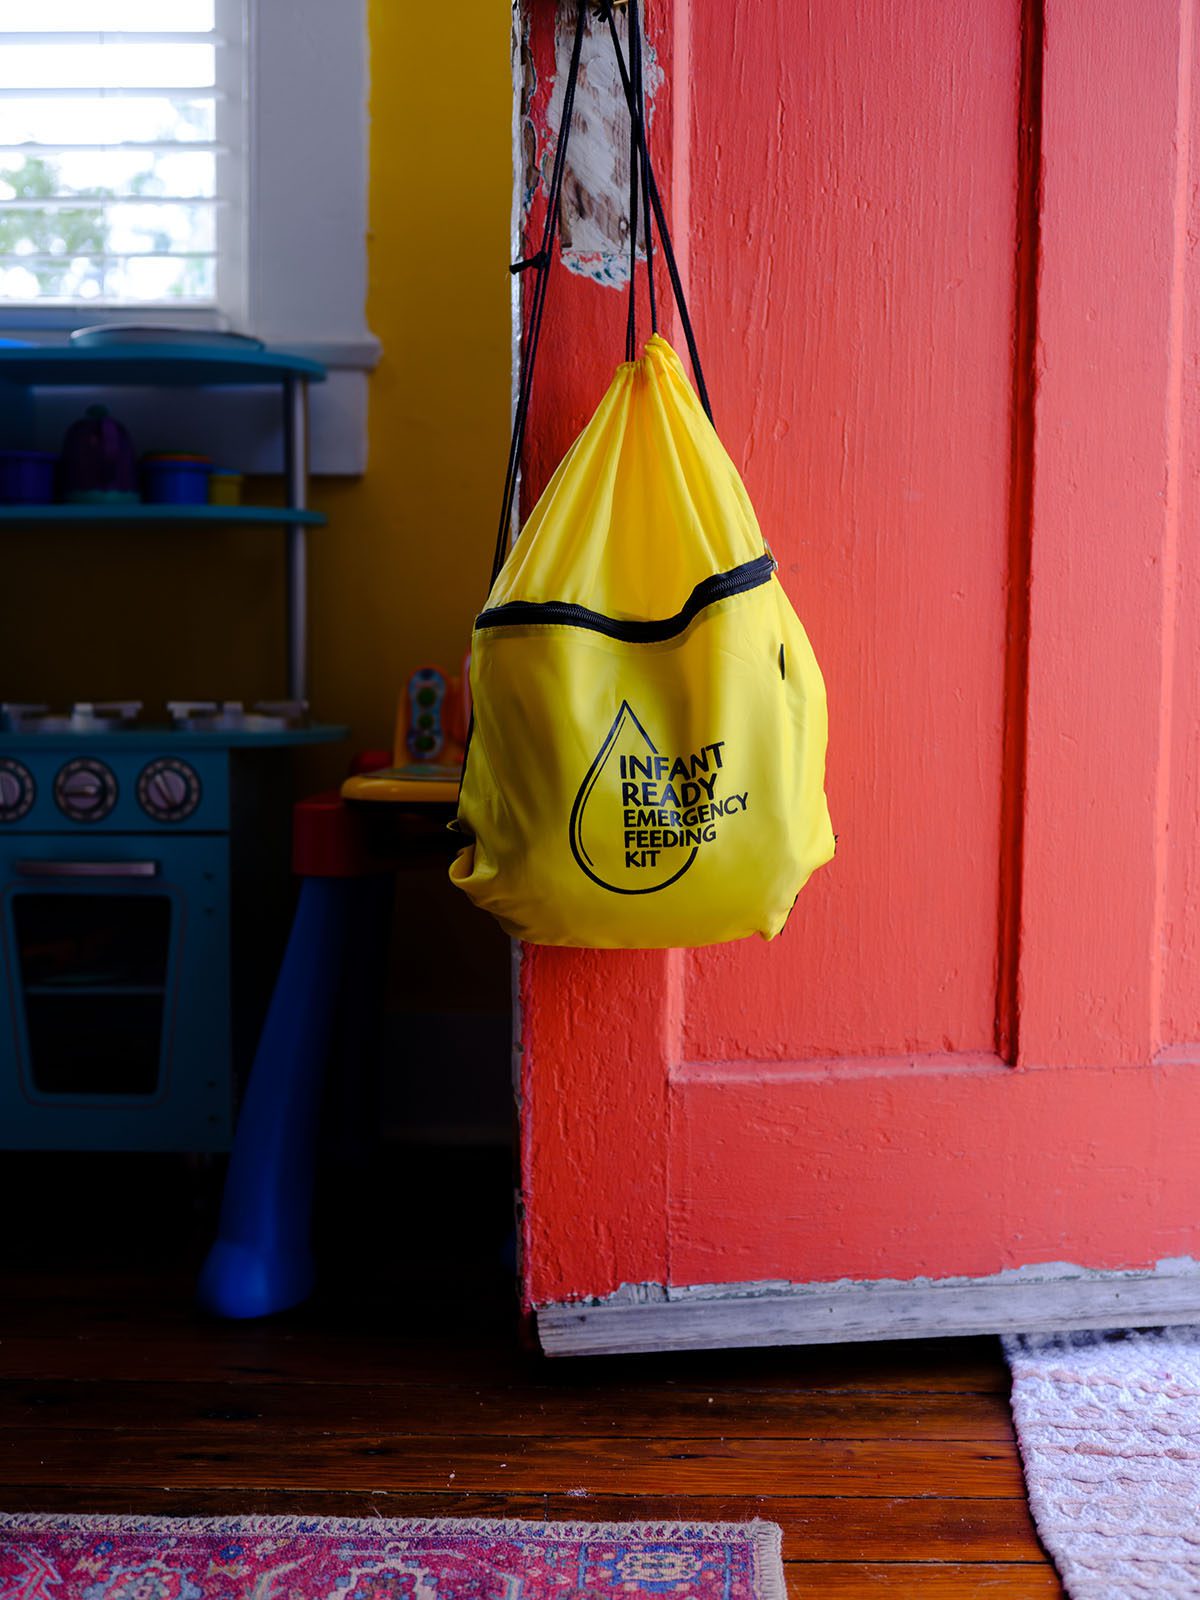 An infant ready emergency feeding kit hangs on a door at Malaika Ludman's home. The kit is a yellow bag with a zipper.